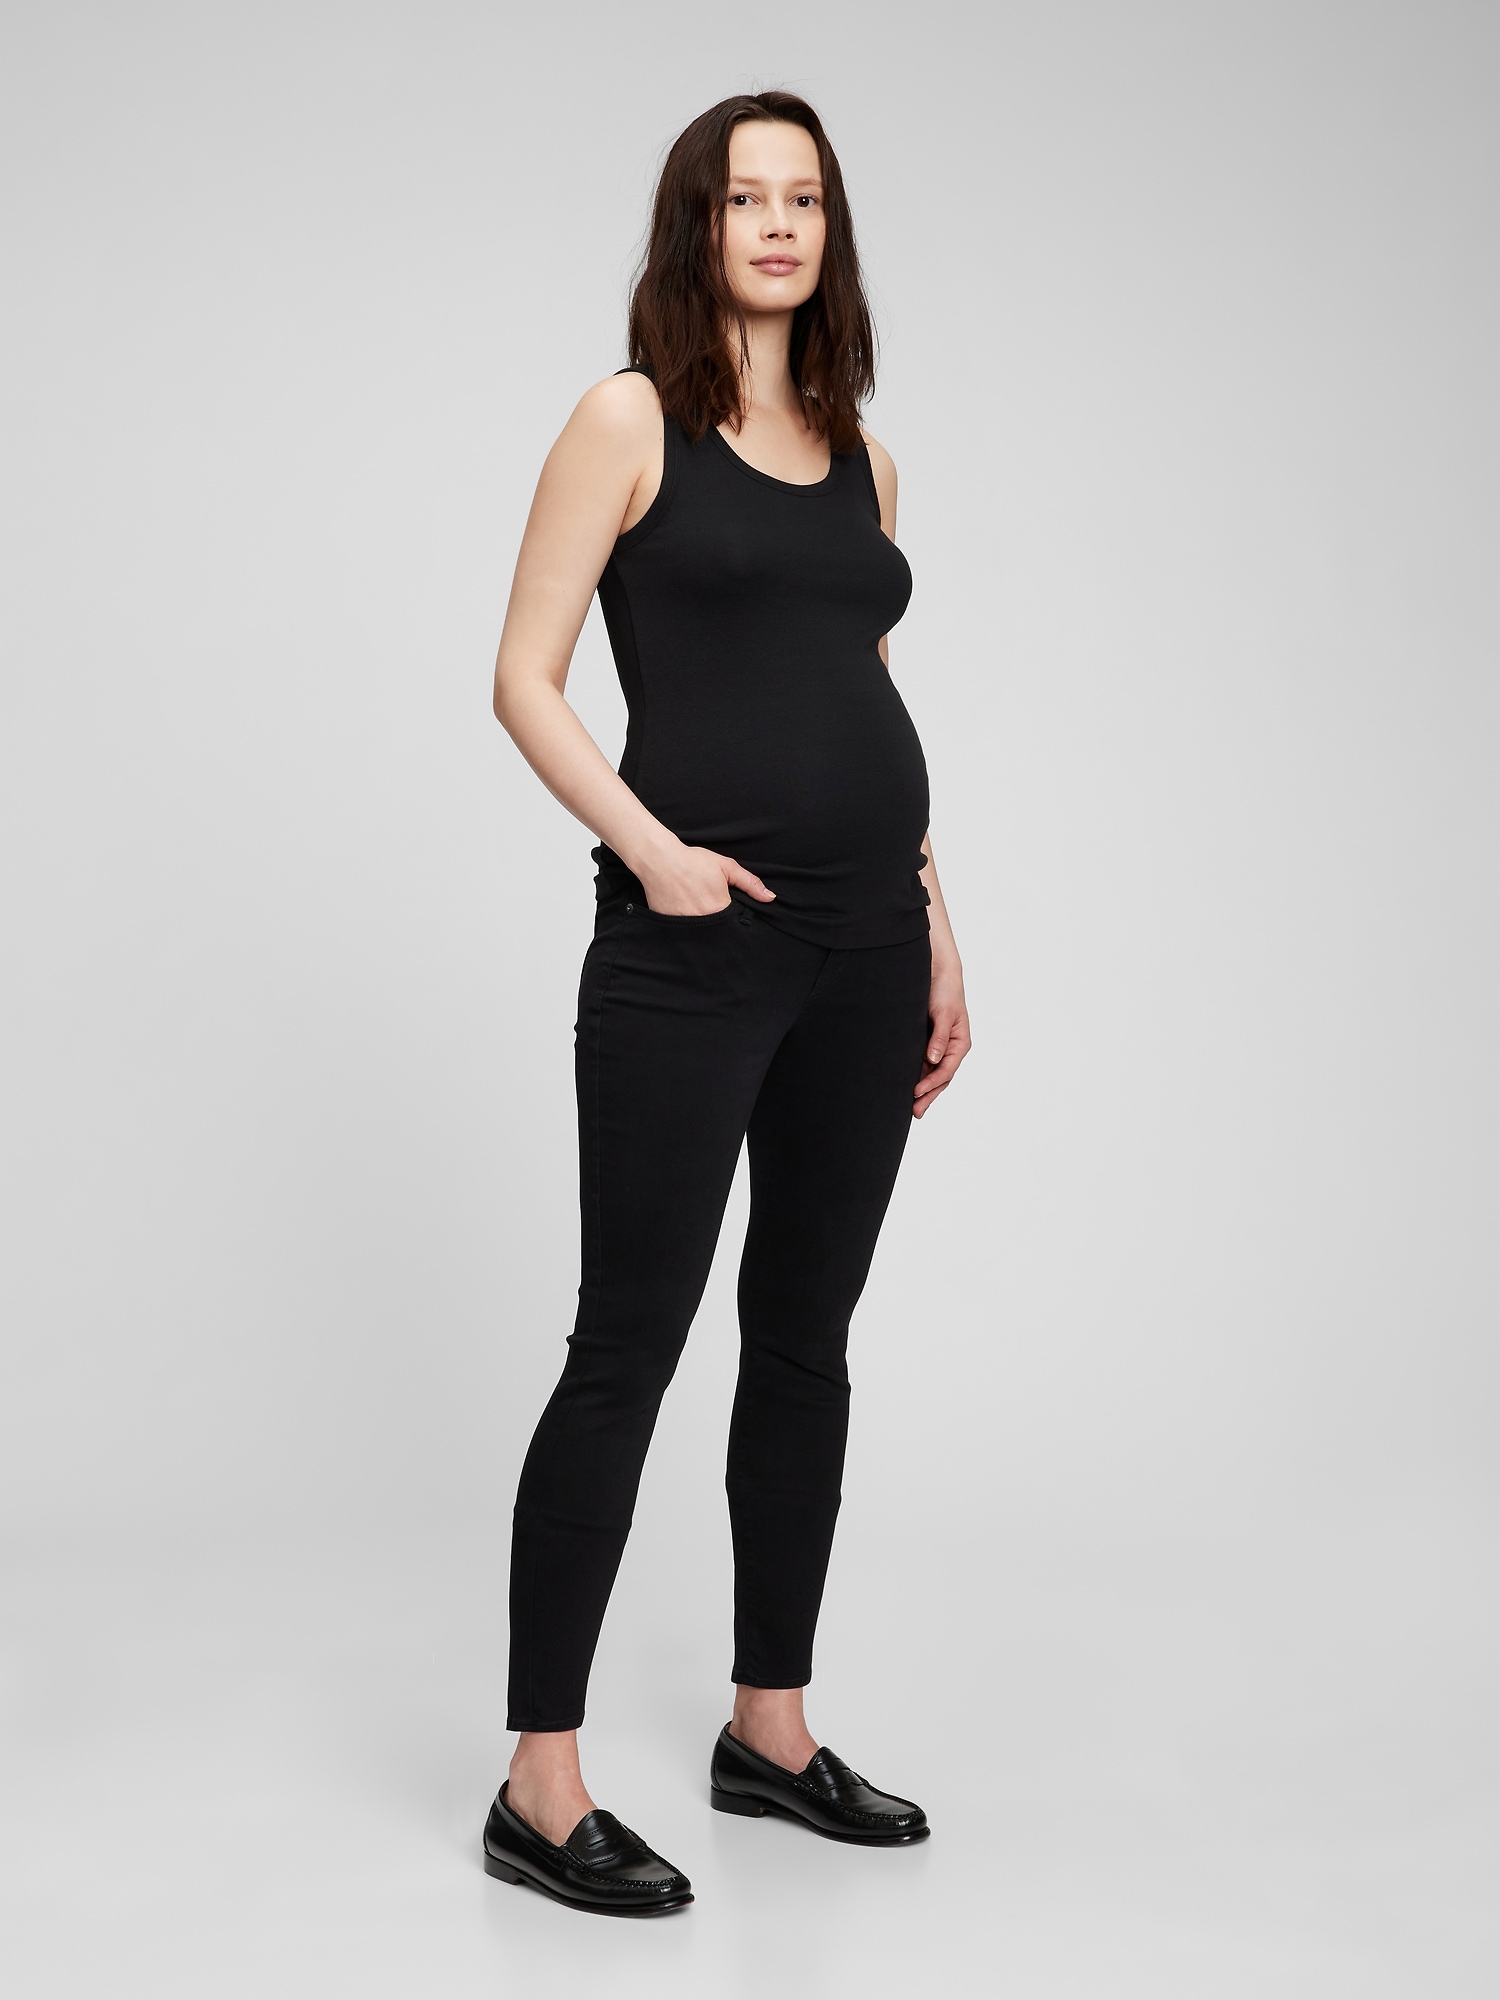 Time and Tru Maternity Full Panel Black Skinny Jean (Small 4-6) at